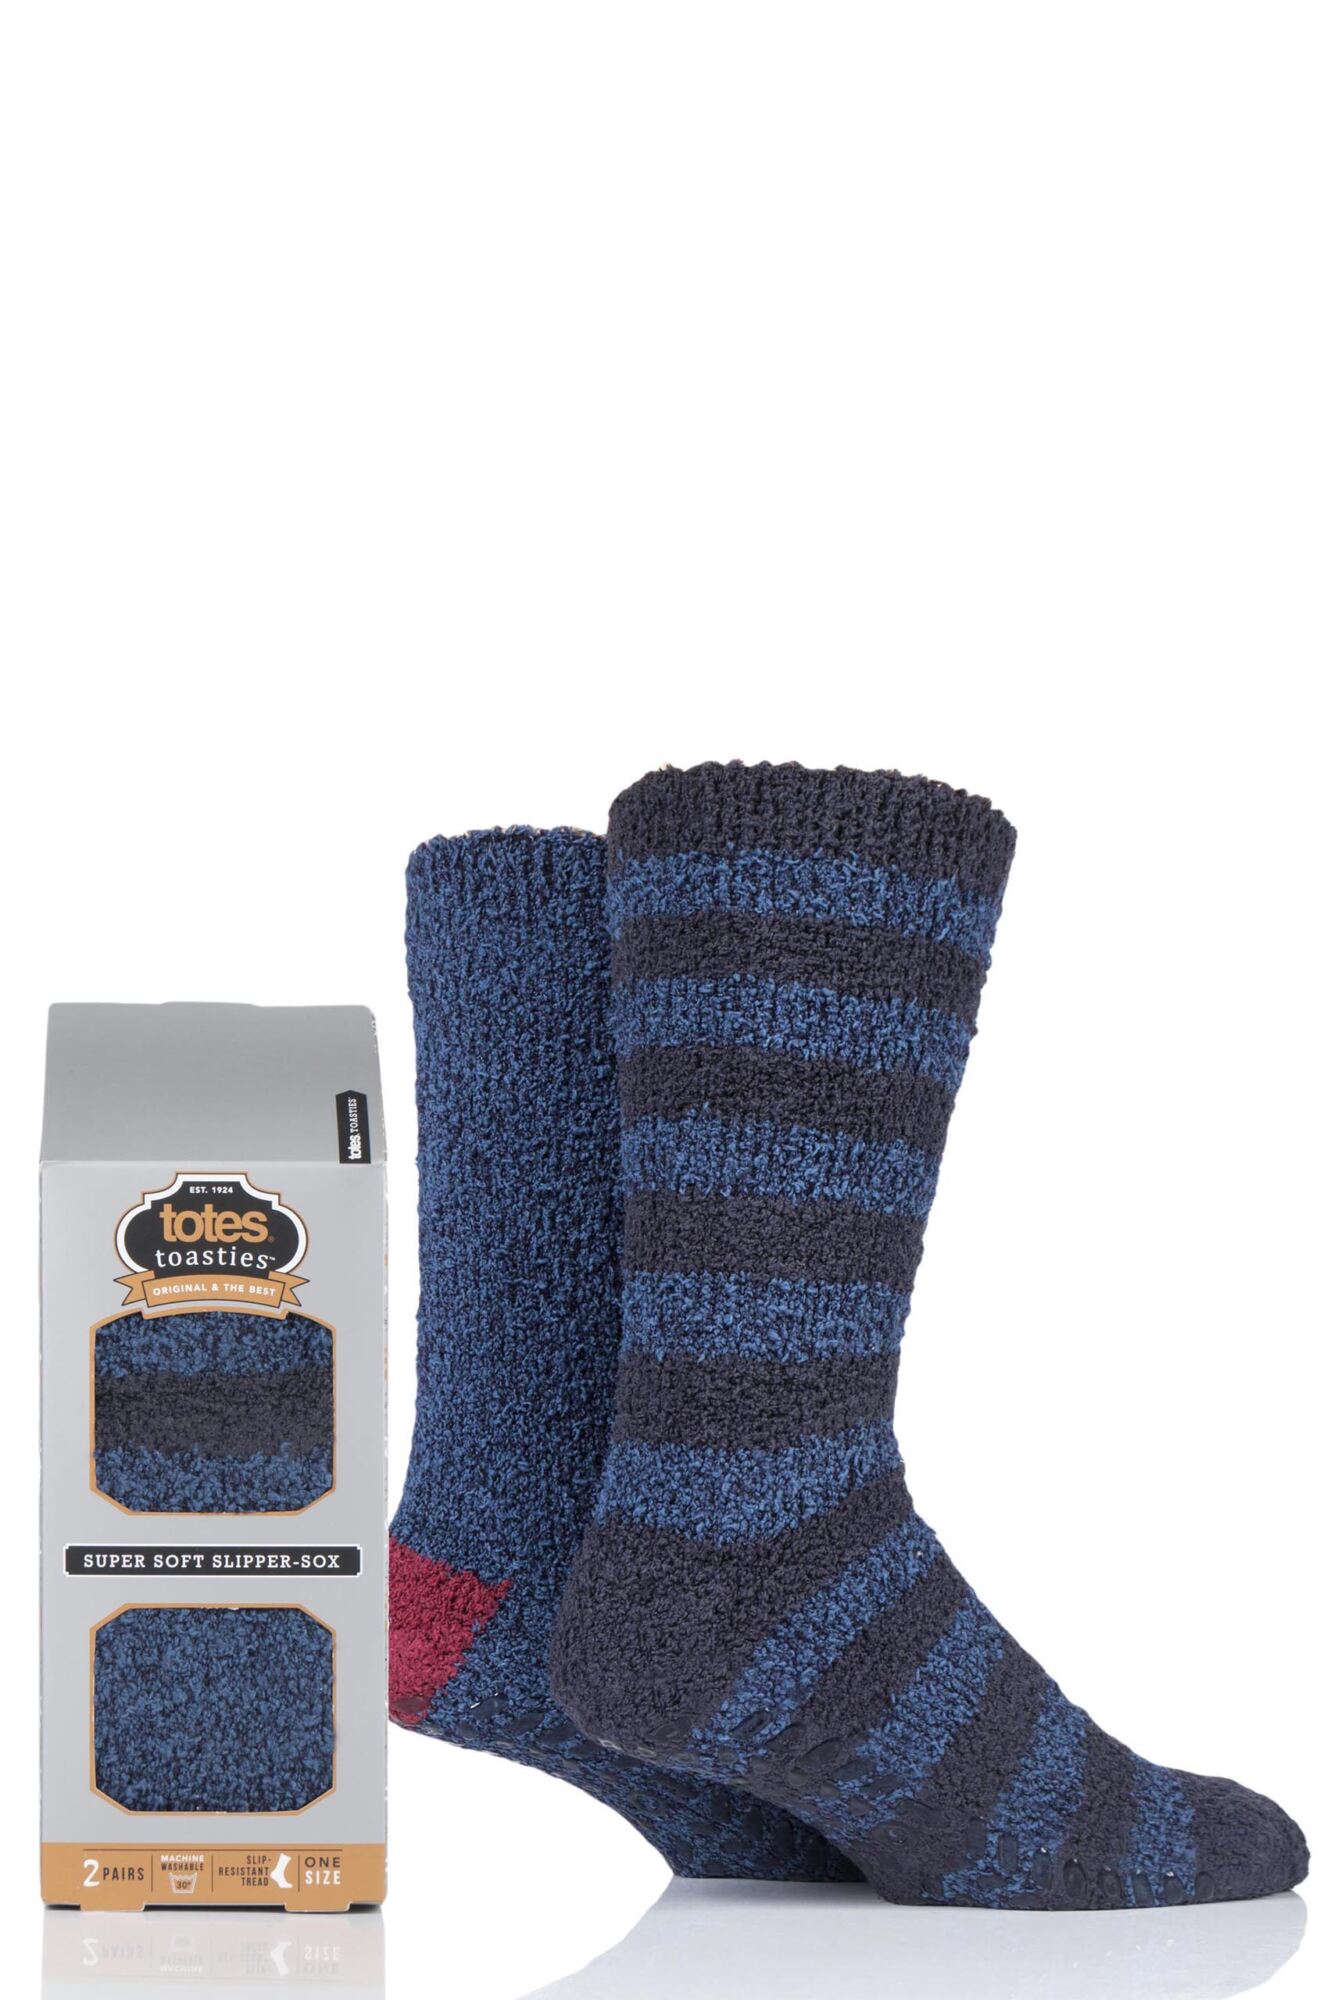 Totes Twin Super Soft Stripe and Plain Bed Socks